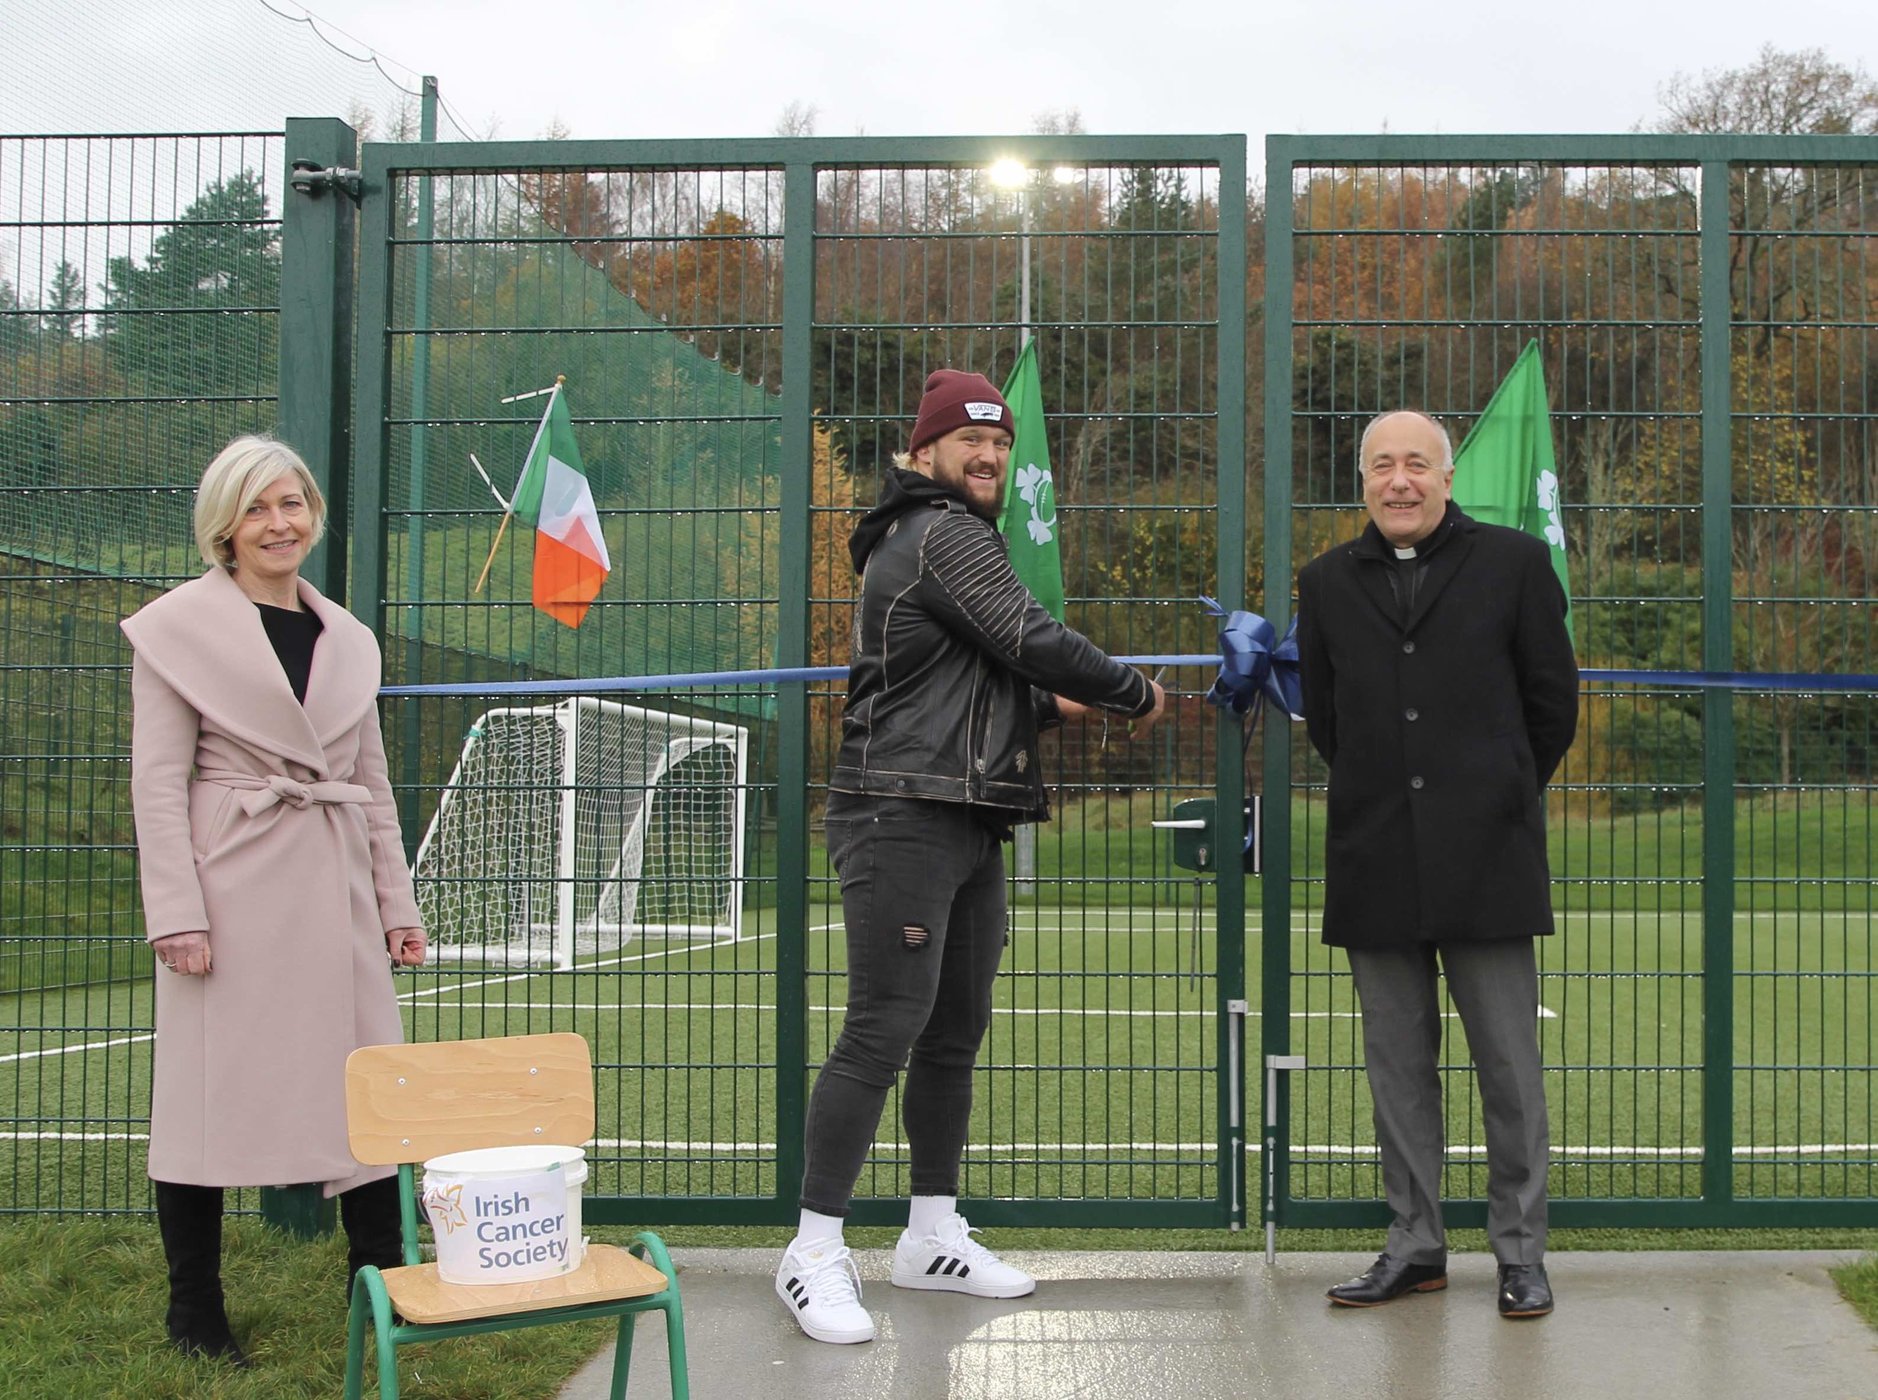 Ireland and Leinster Prop Andrew Porter cuts the ribbon on the new pitch at Blessington No 1 School. He is pictured with school principal Lillian Murphy and Rector of Blessington Canon Leonard Ruddock.